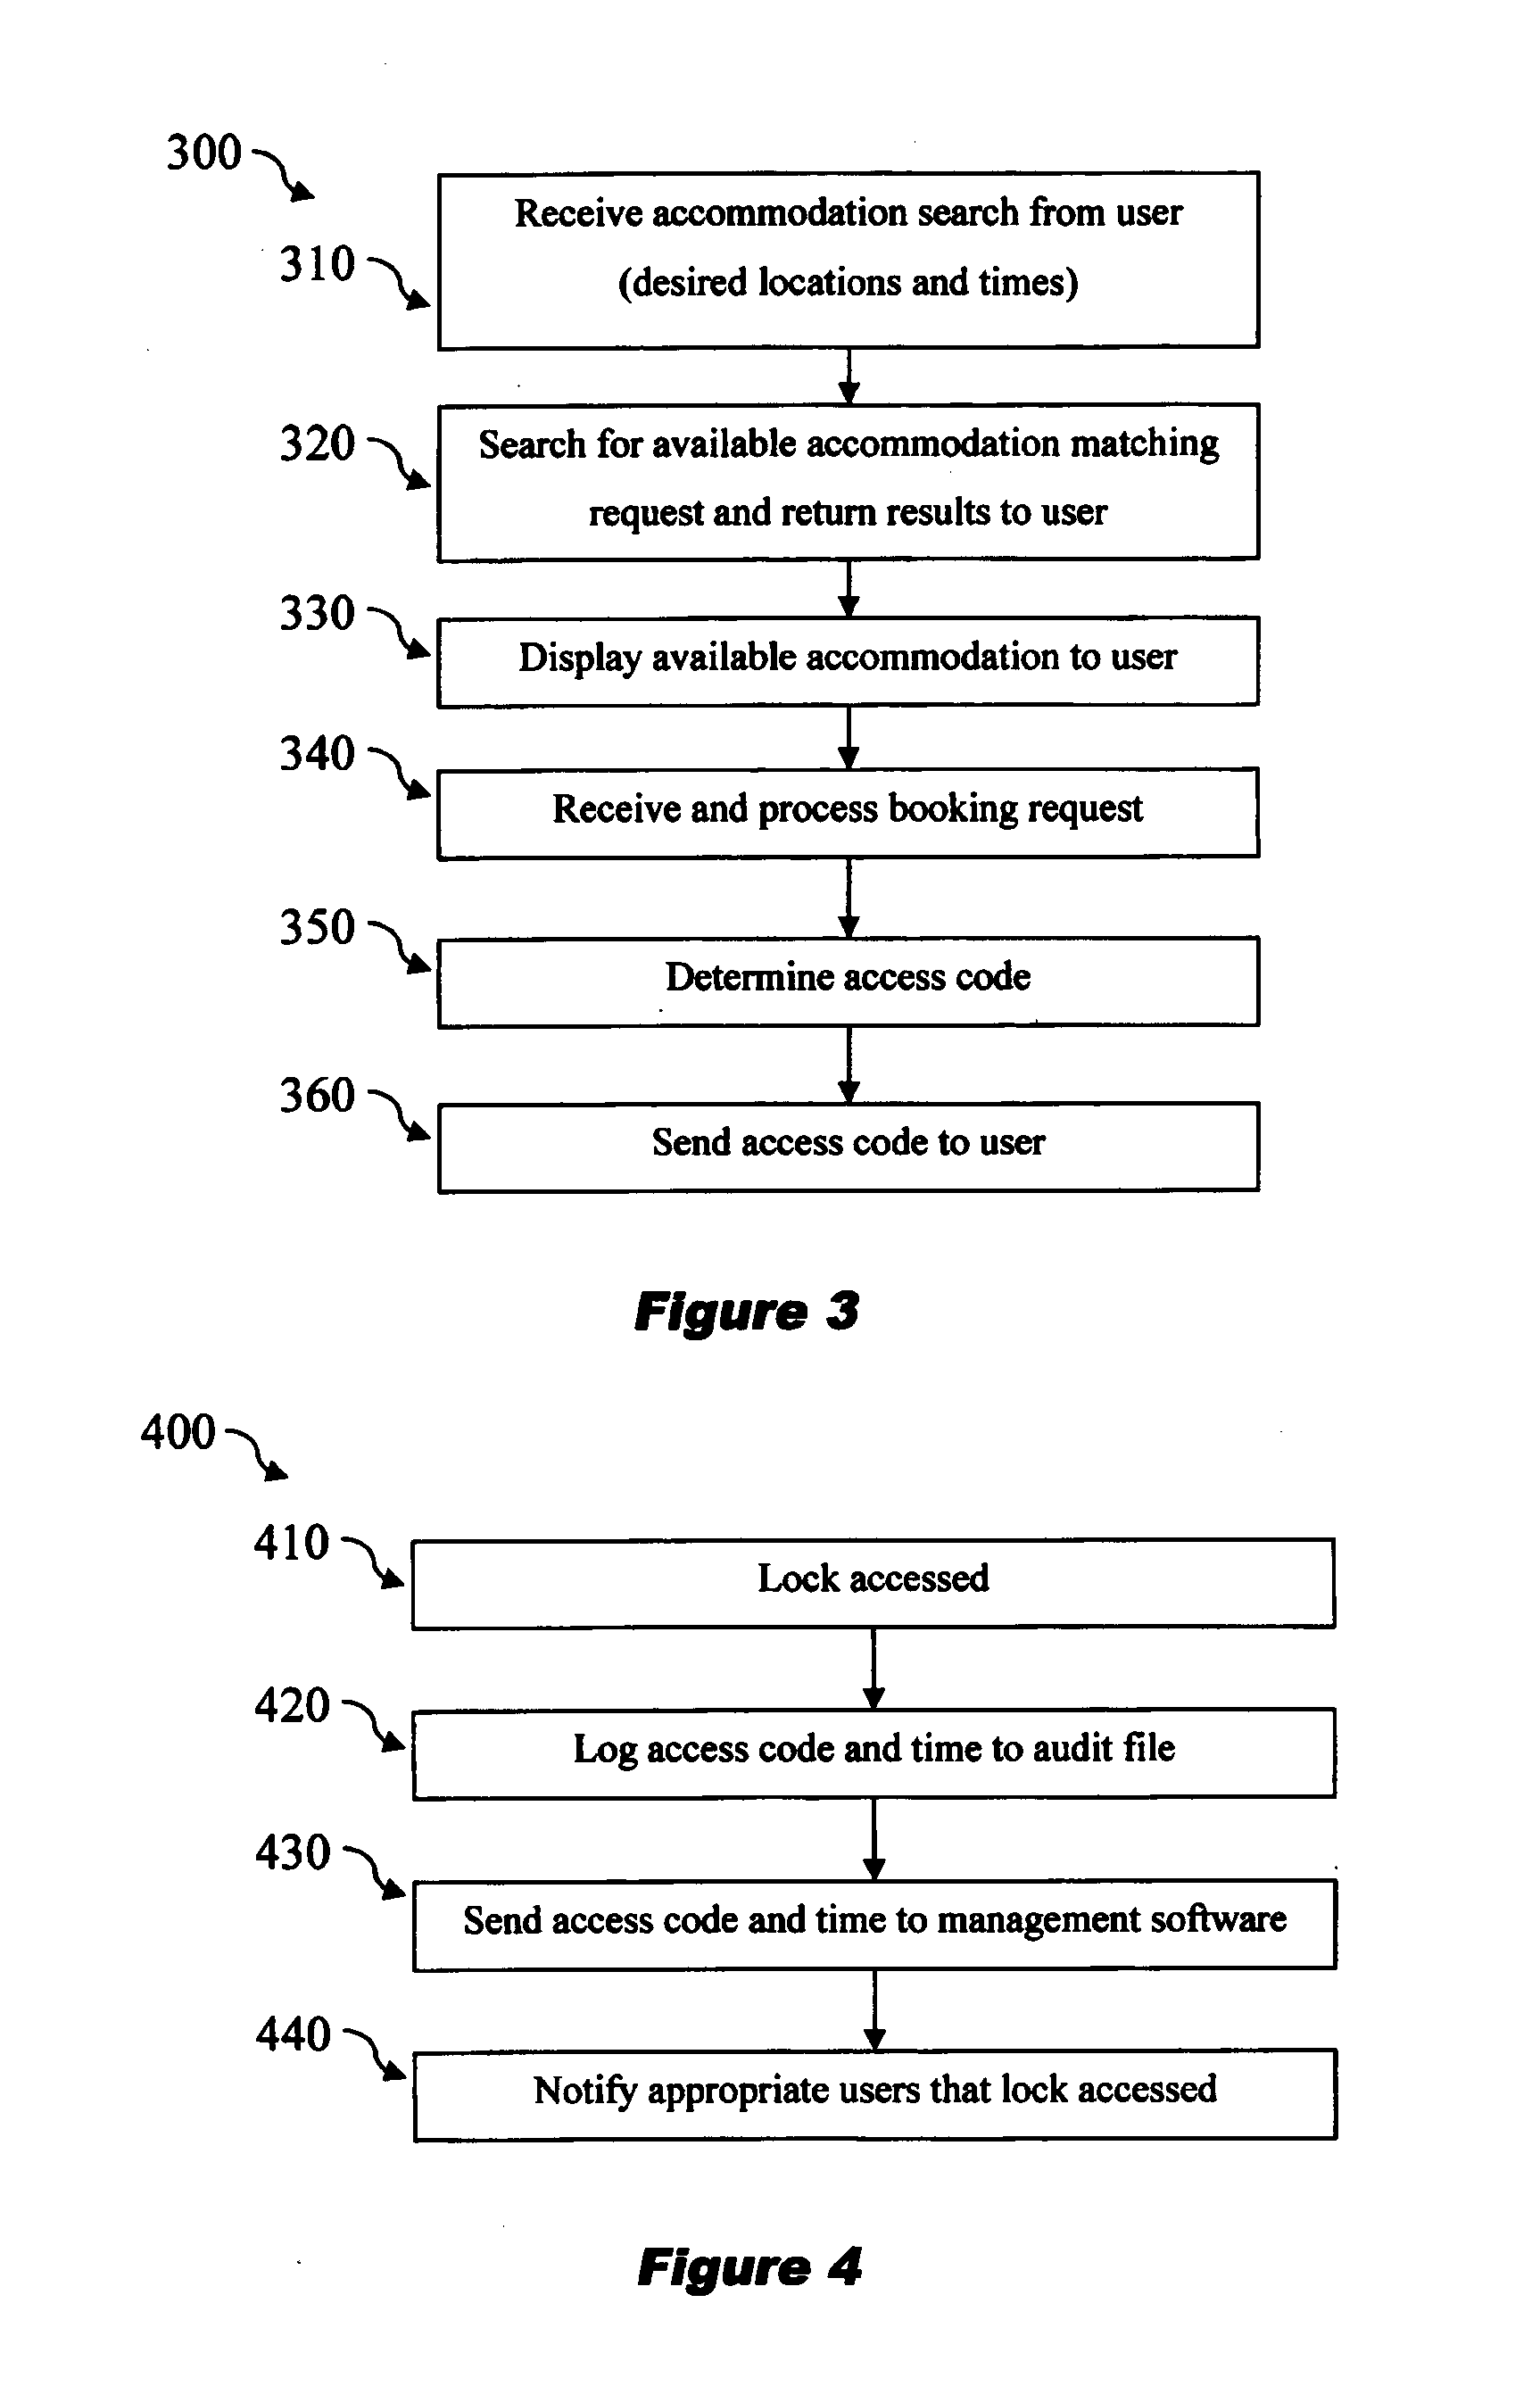 System and method for controlling access to electronic locks